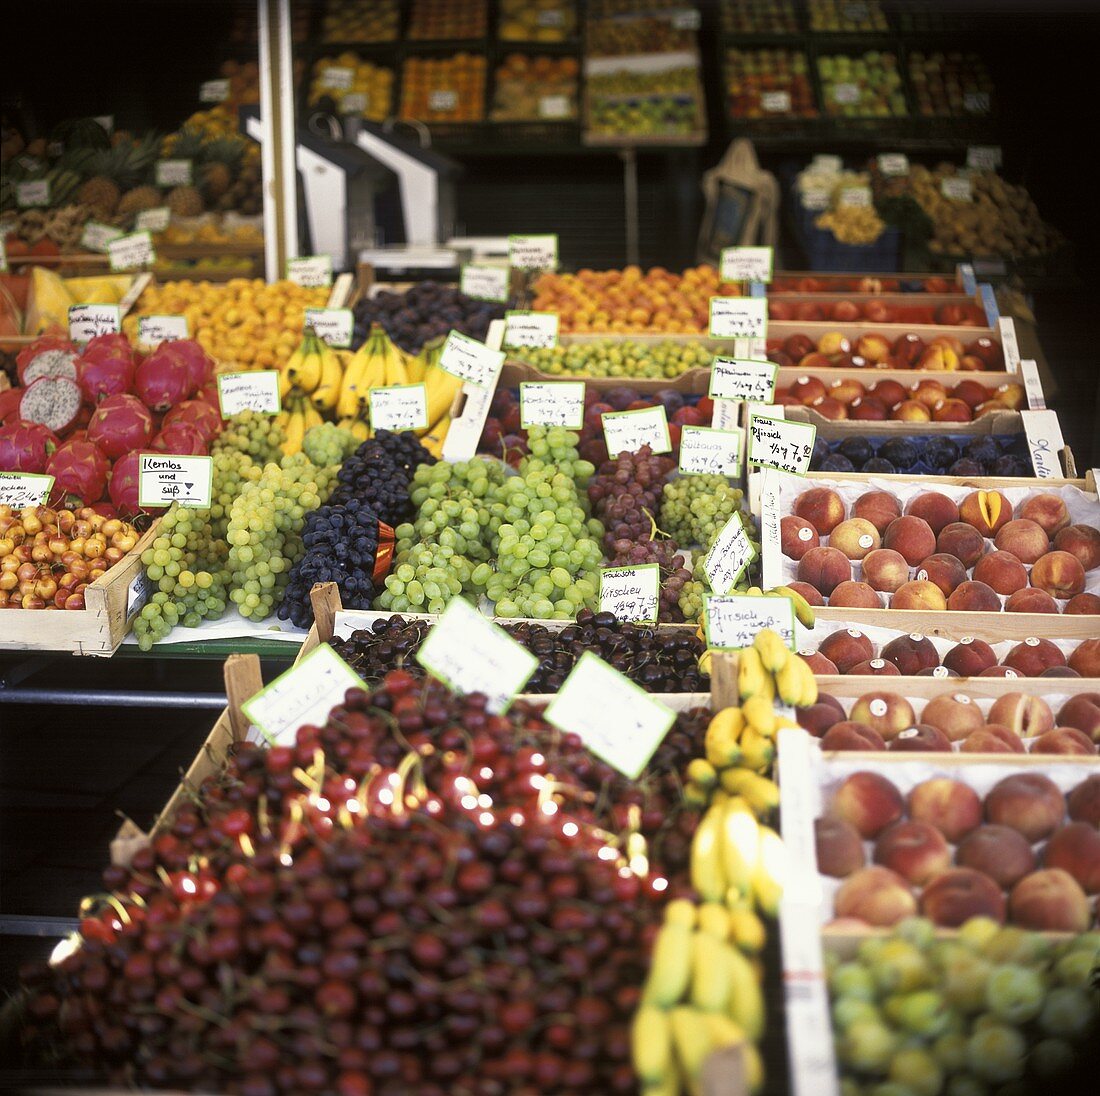 Fruit in crates on a market stall